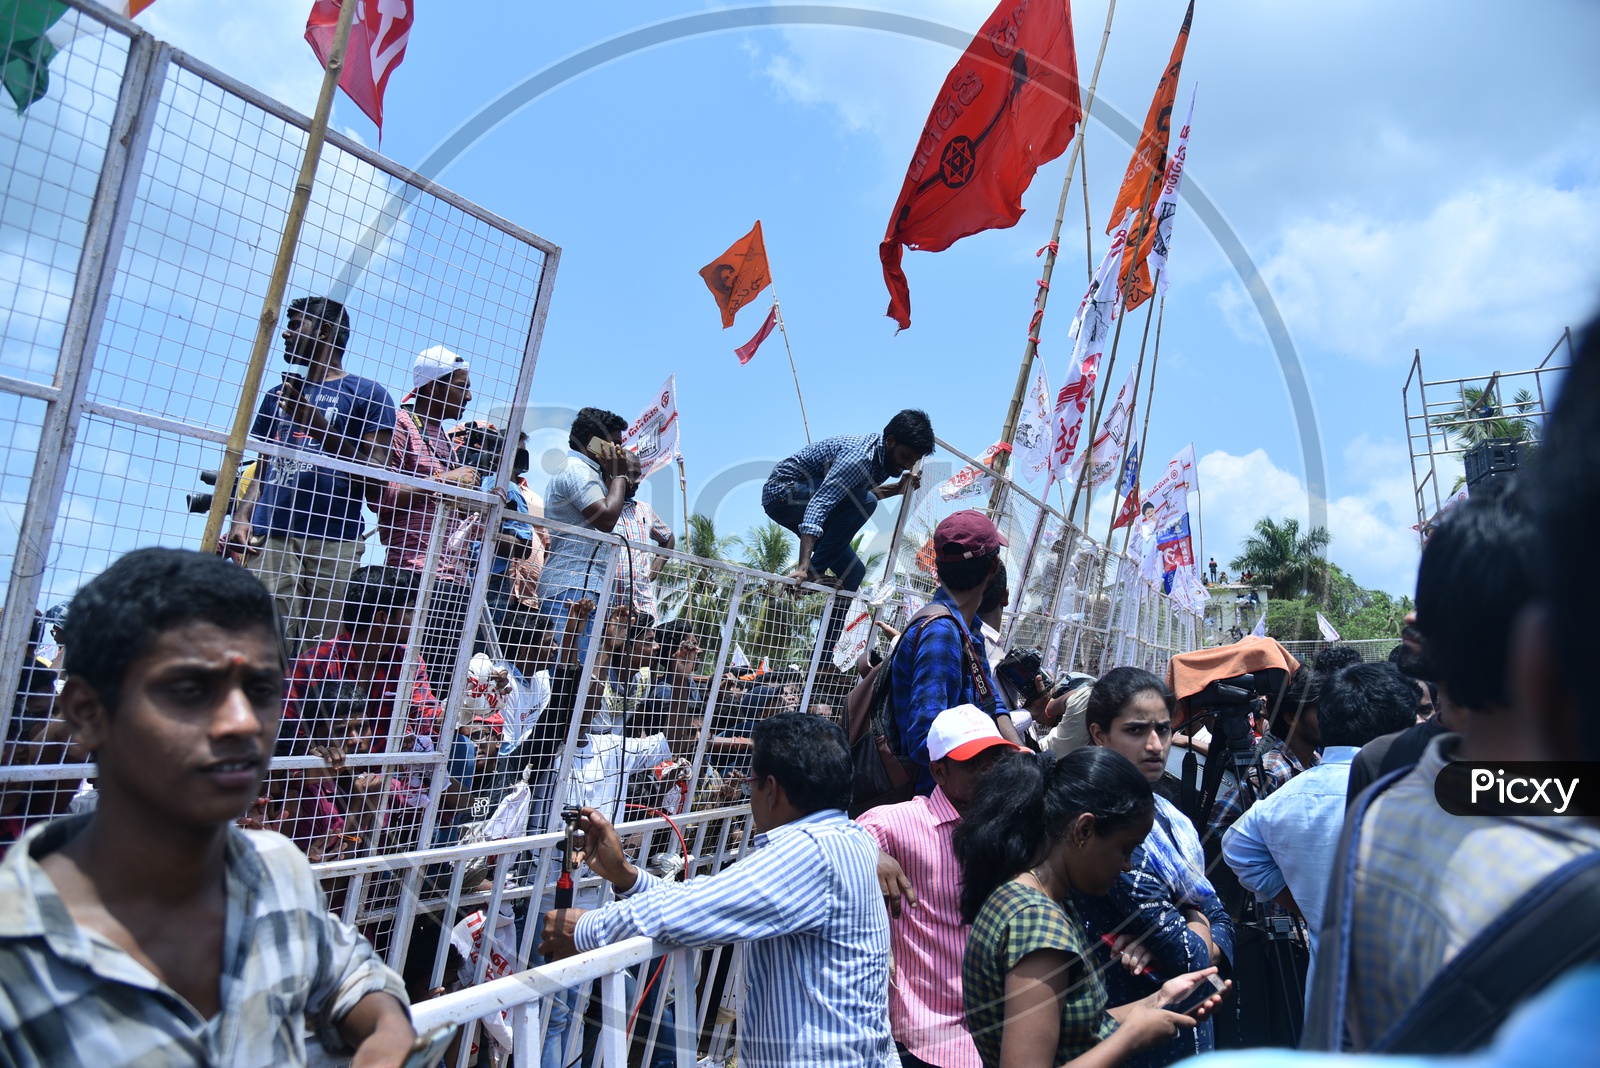 Janasena party supporter jumping over the barricade  at an election campaign in Amalapuram